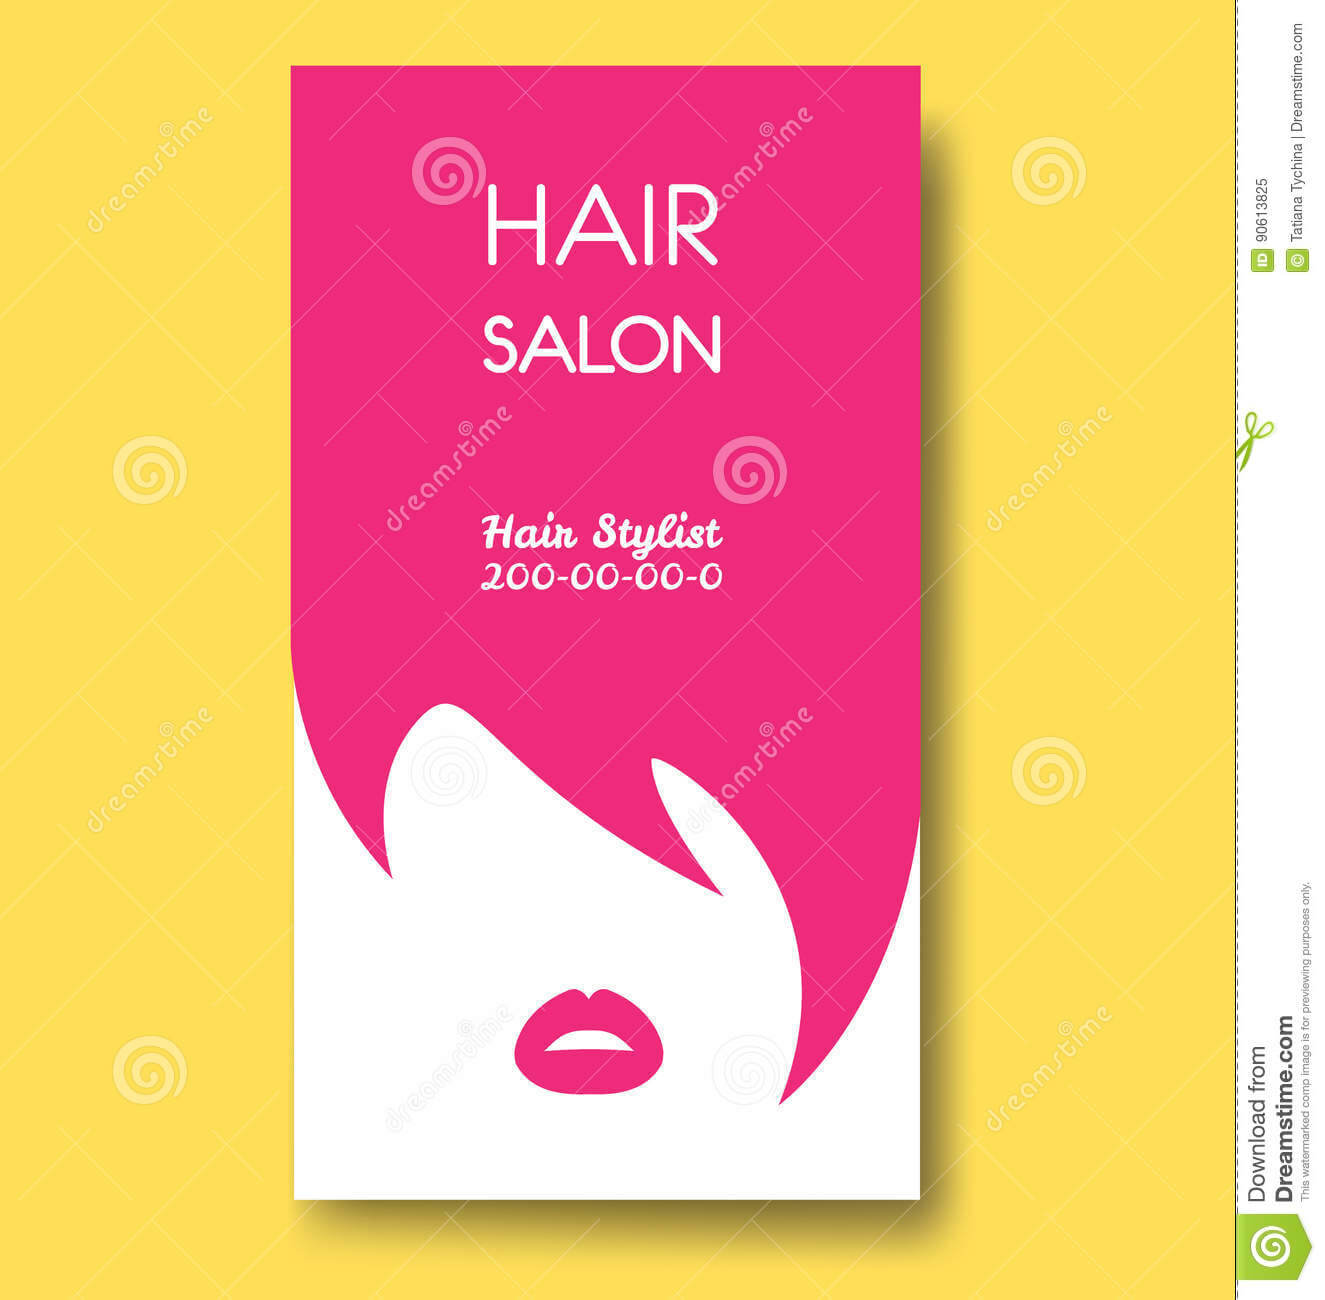 Hair Salon Business Card Templates With Pink Hair And Pink Pertaining To Hair Salon Business Card Template